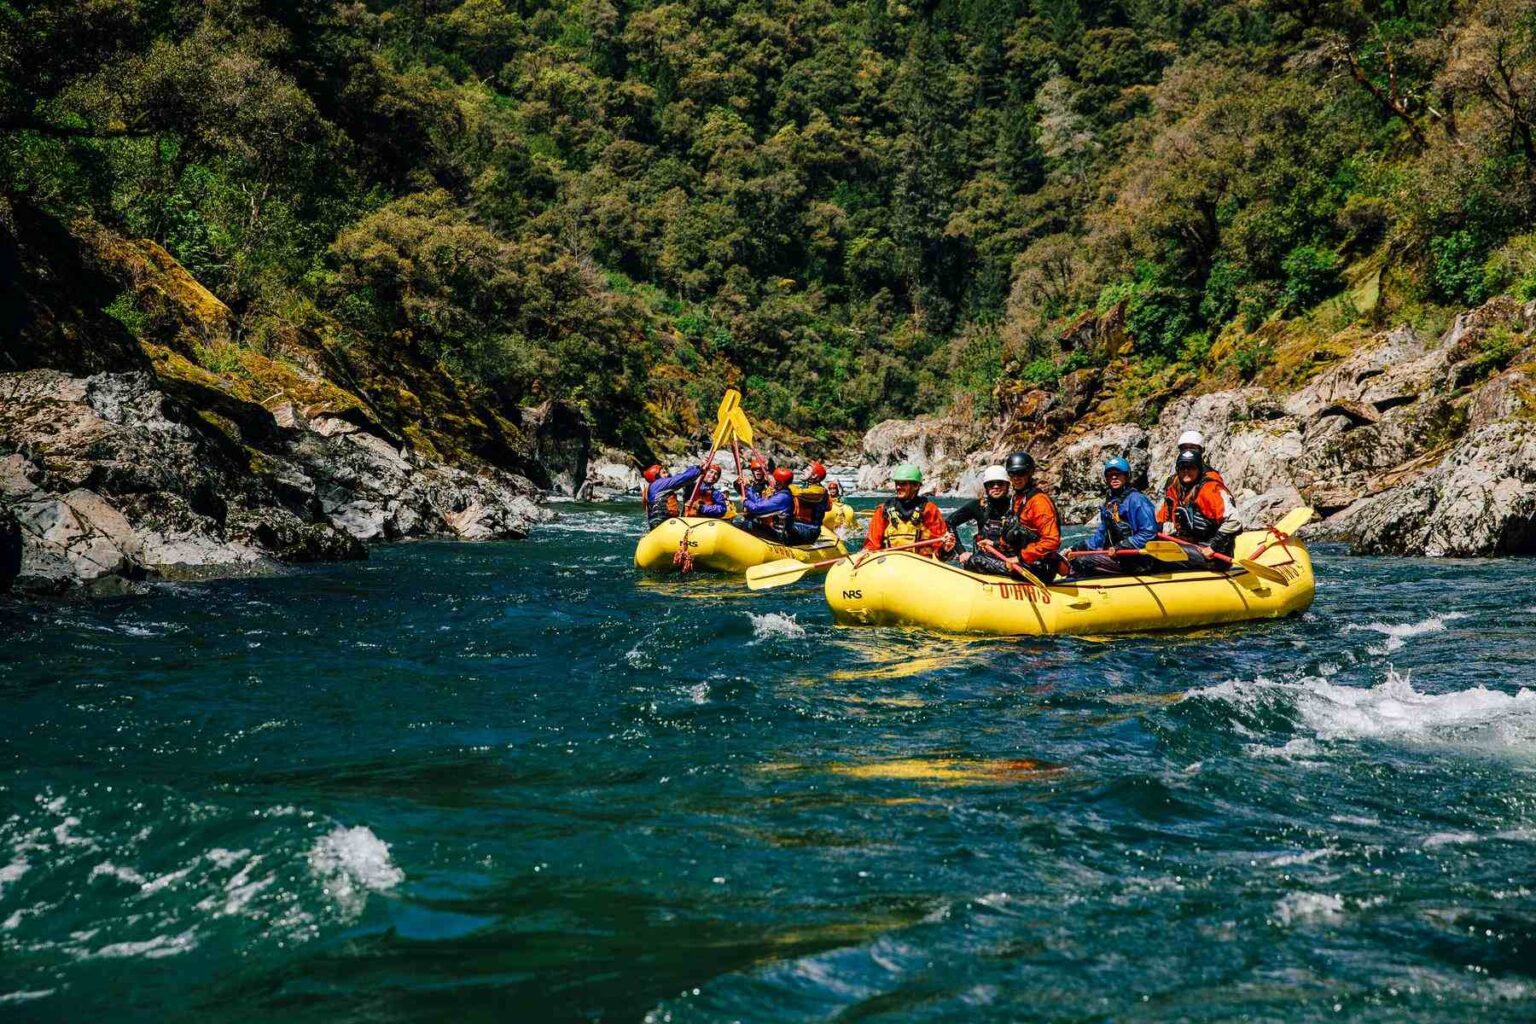 Rafts float side by side on the Middle Fork of the American River